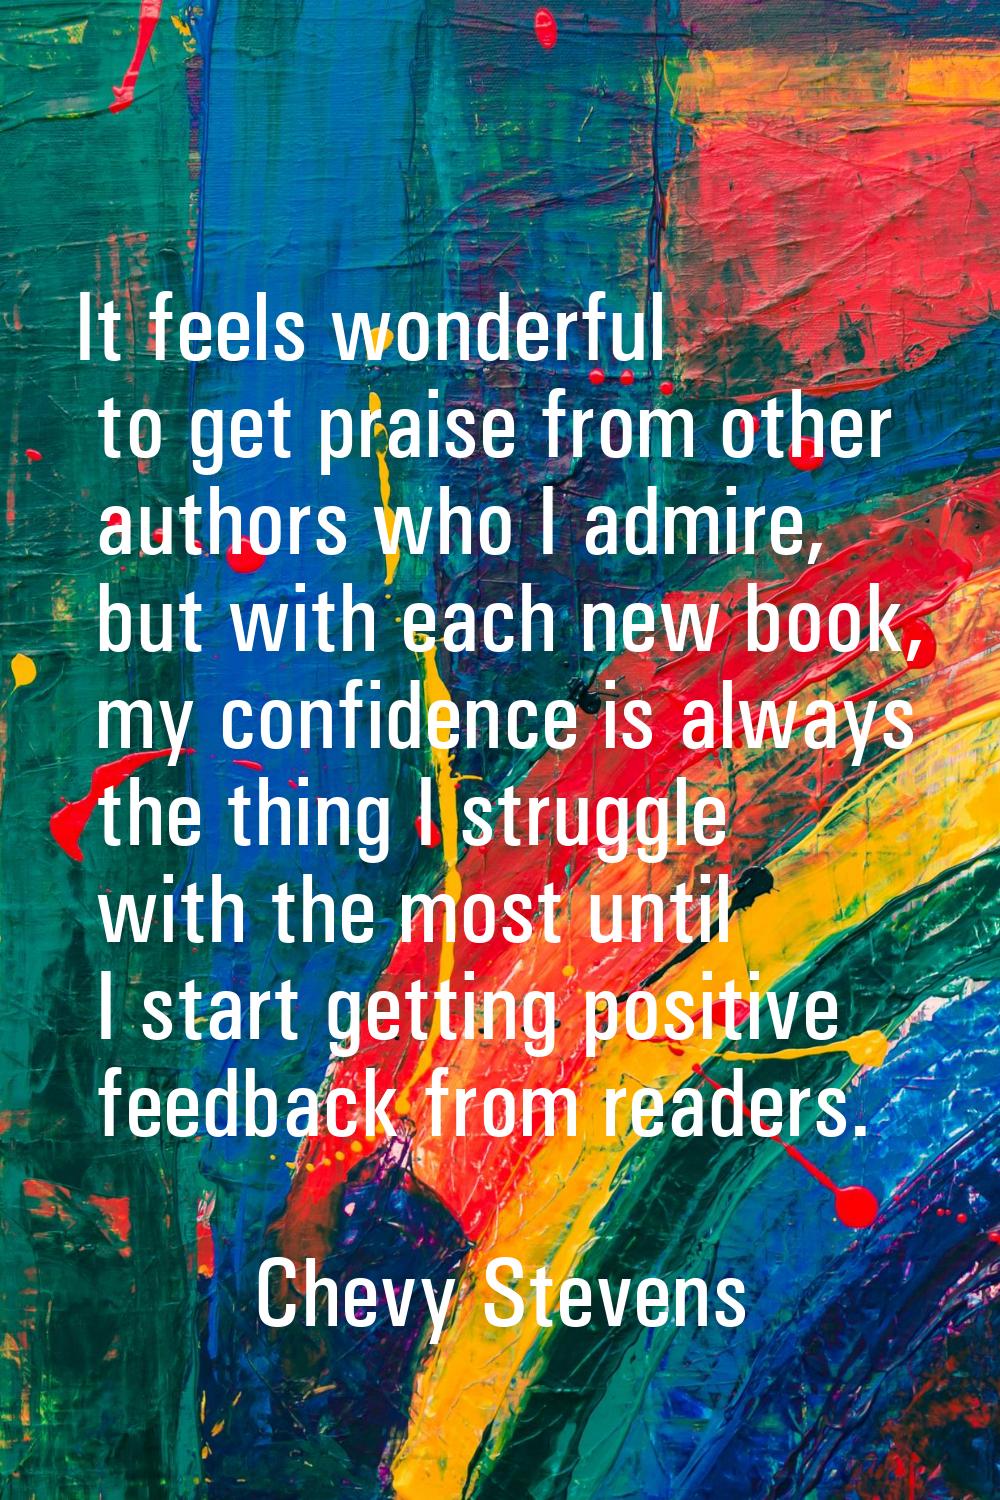 It feels wonderful to get praise from other authors who I admire, but with each new book, my confid